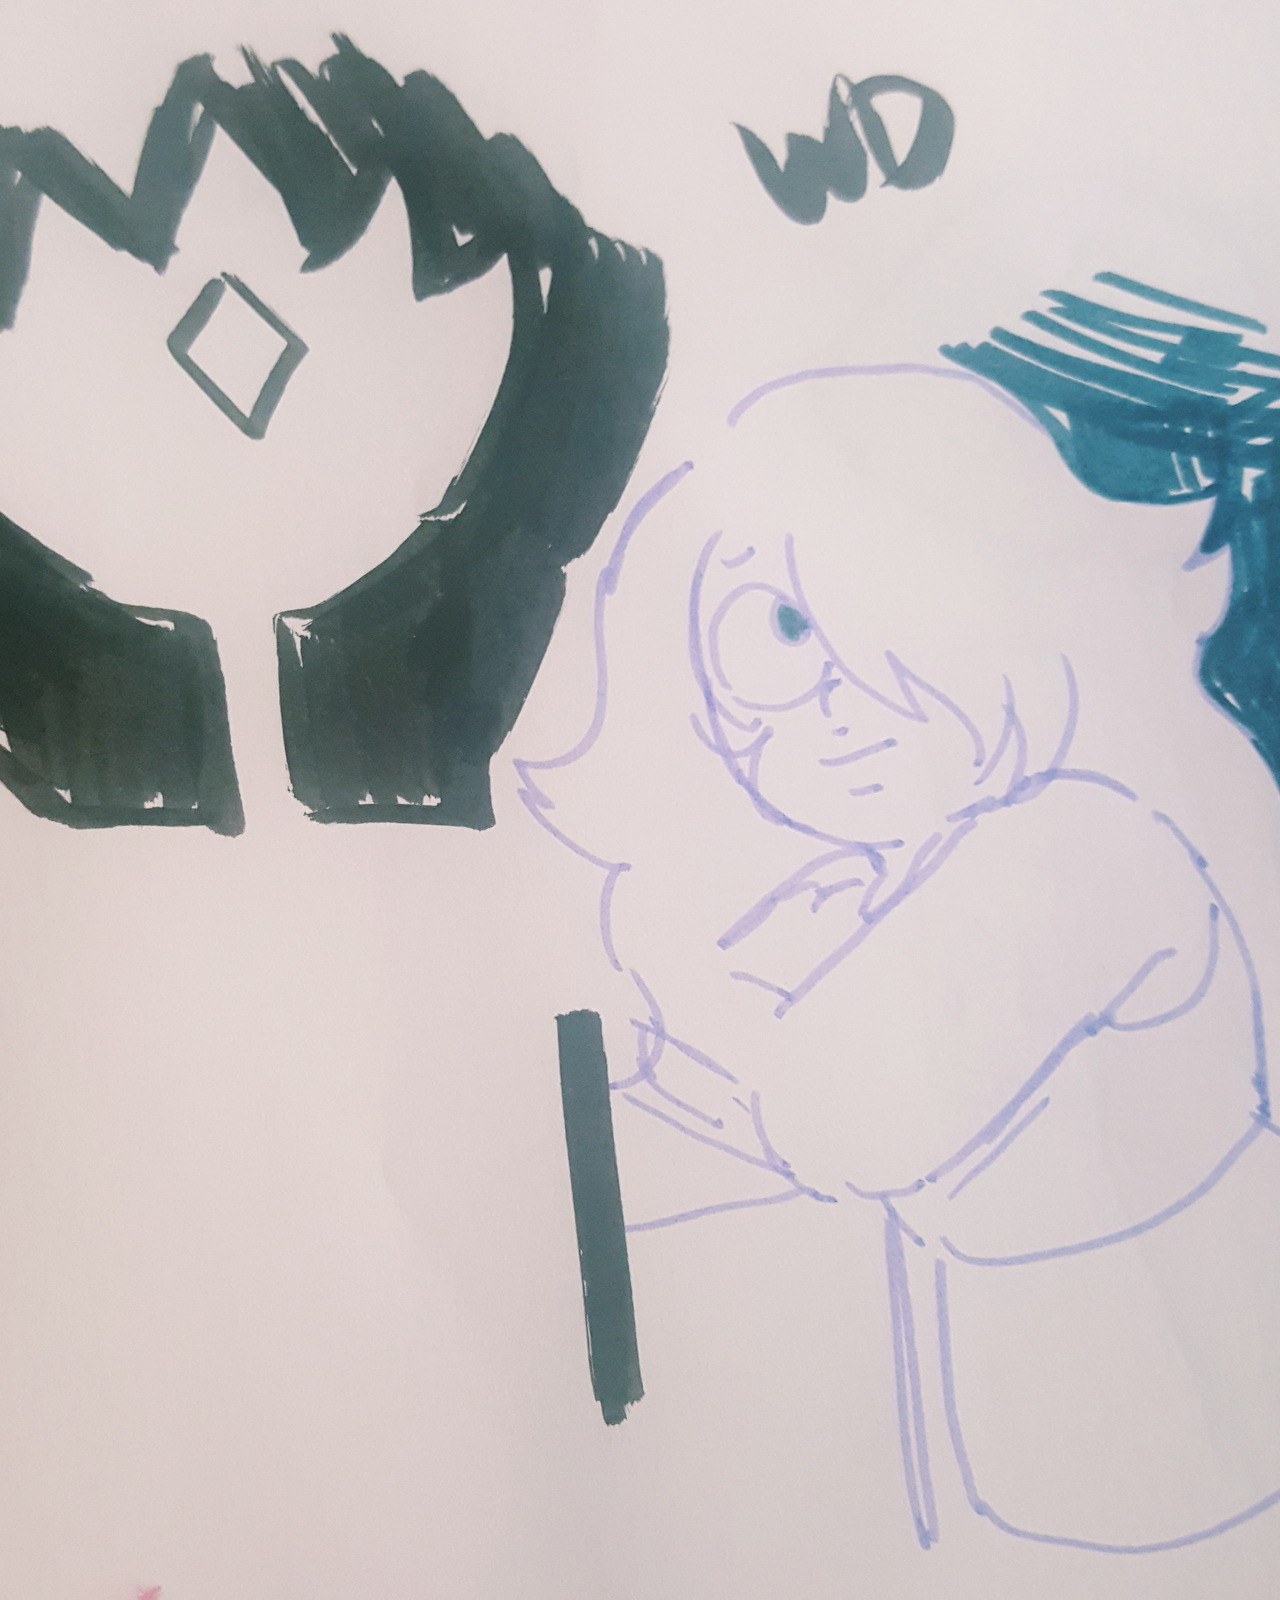 SU doodles (I’m like so hyped for the new episodes on Monday)